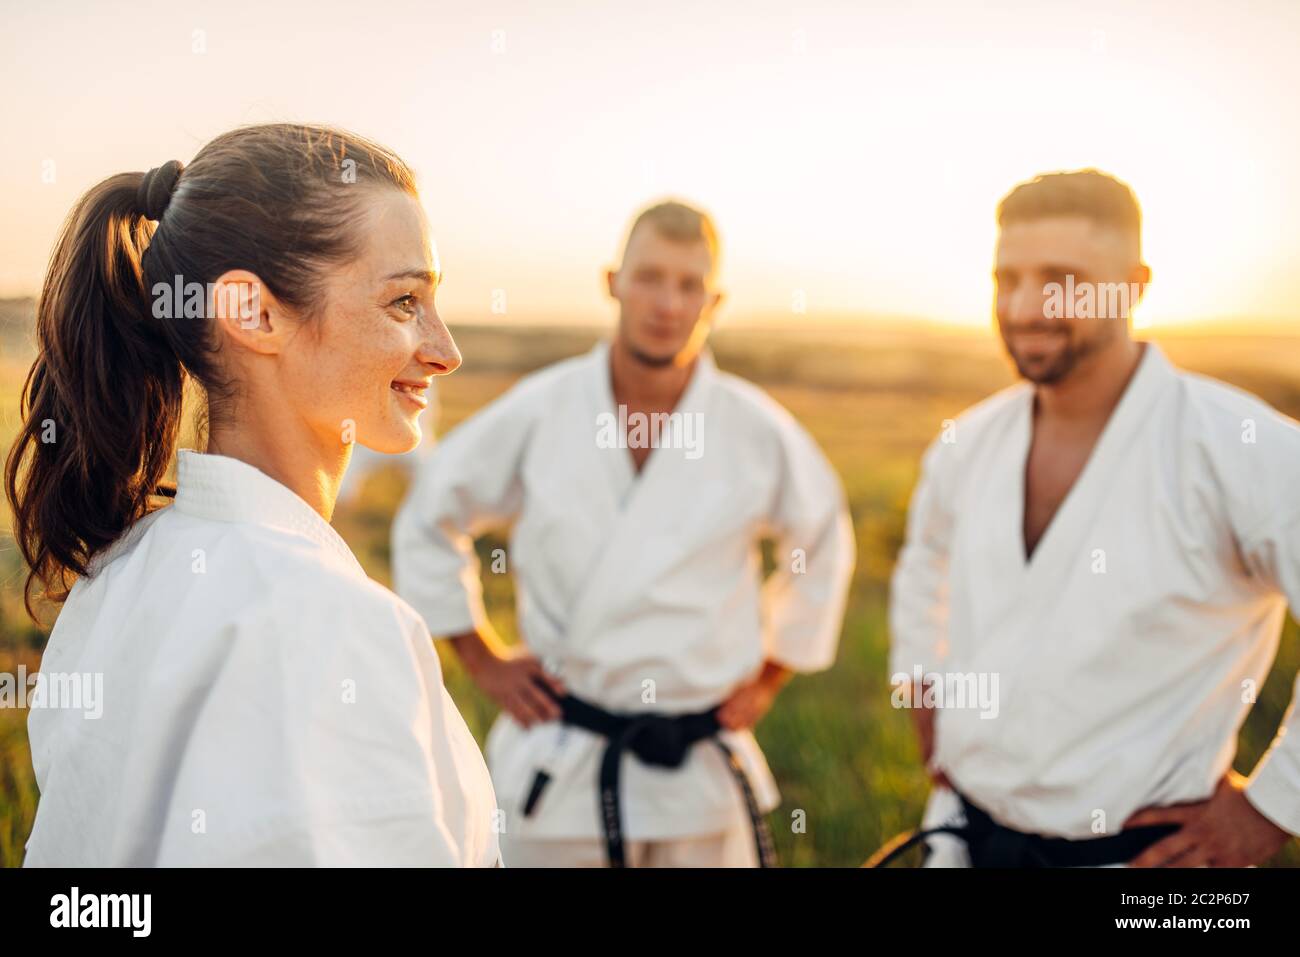 Two male and one female karate fighters on training in summer field. Martial art workout outdoor, technique practice Stock Photo